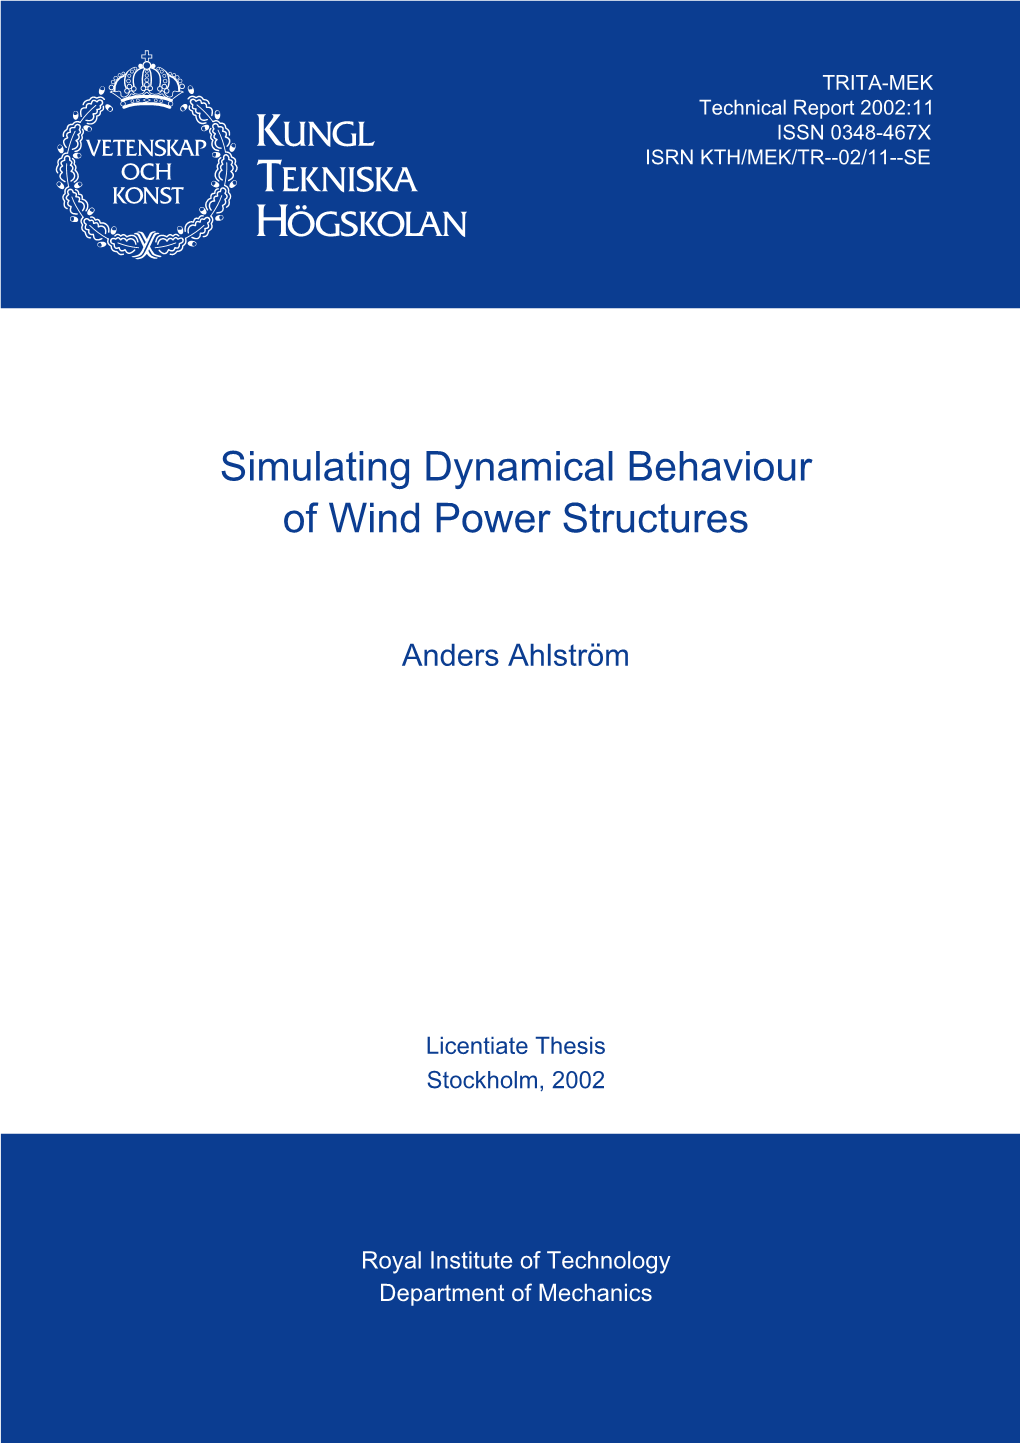 Simulating Dynamical Behaviour of Wind Power Structures